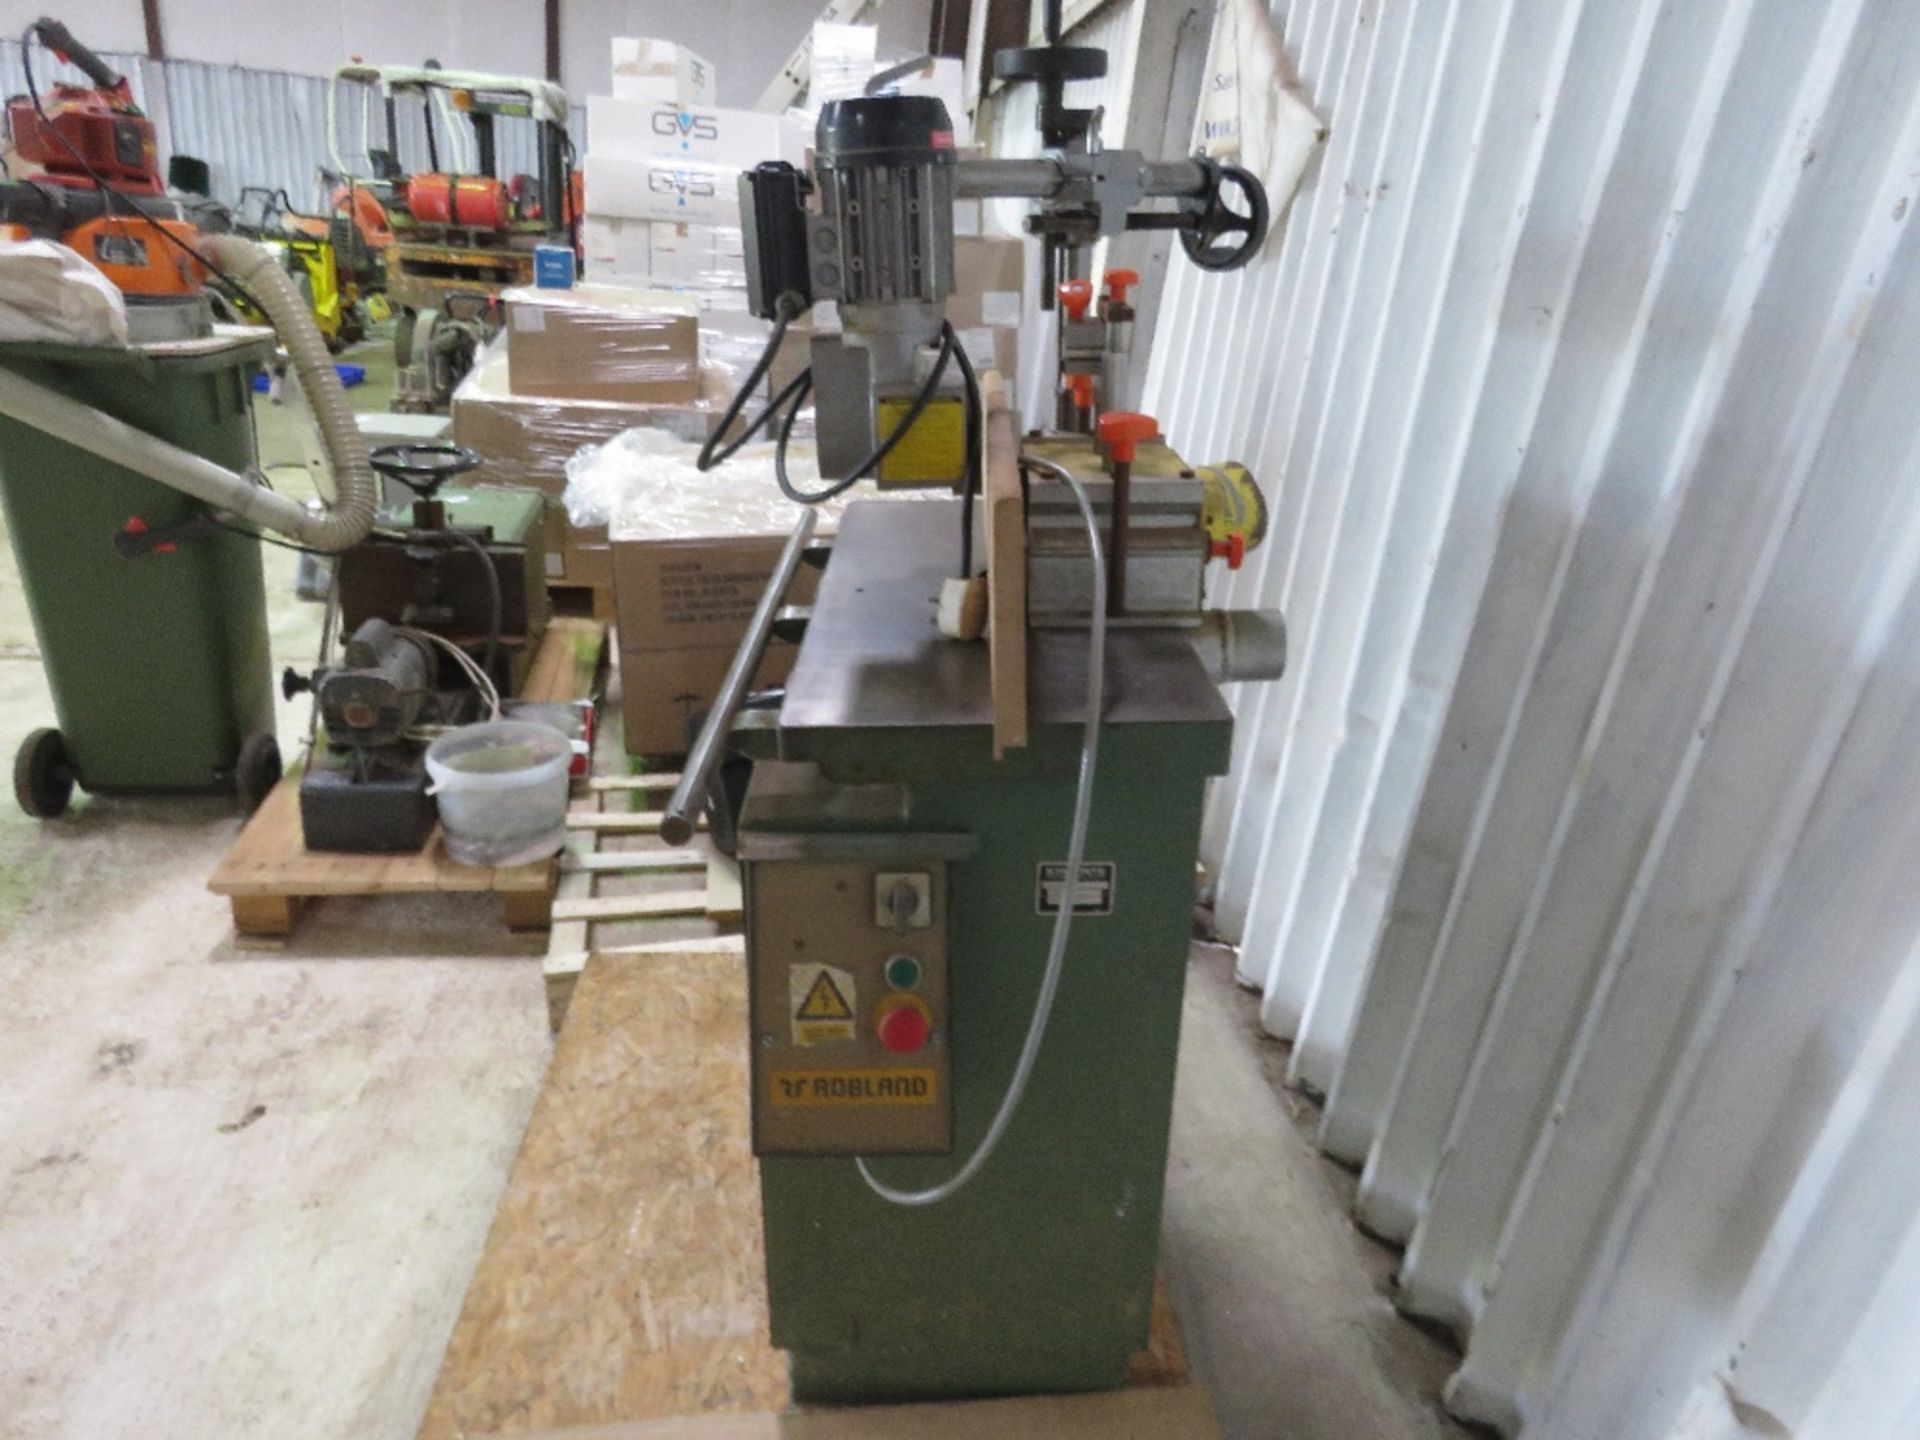 STARTRITE T30 SPINDLE MOULDER UNIT WITH 240VOLT POWERED FEED HEAD, MAIN UNIT IS 3 PHASE POWERED..... - Image 2 of 5